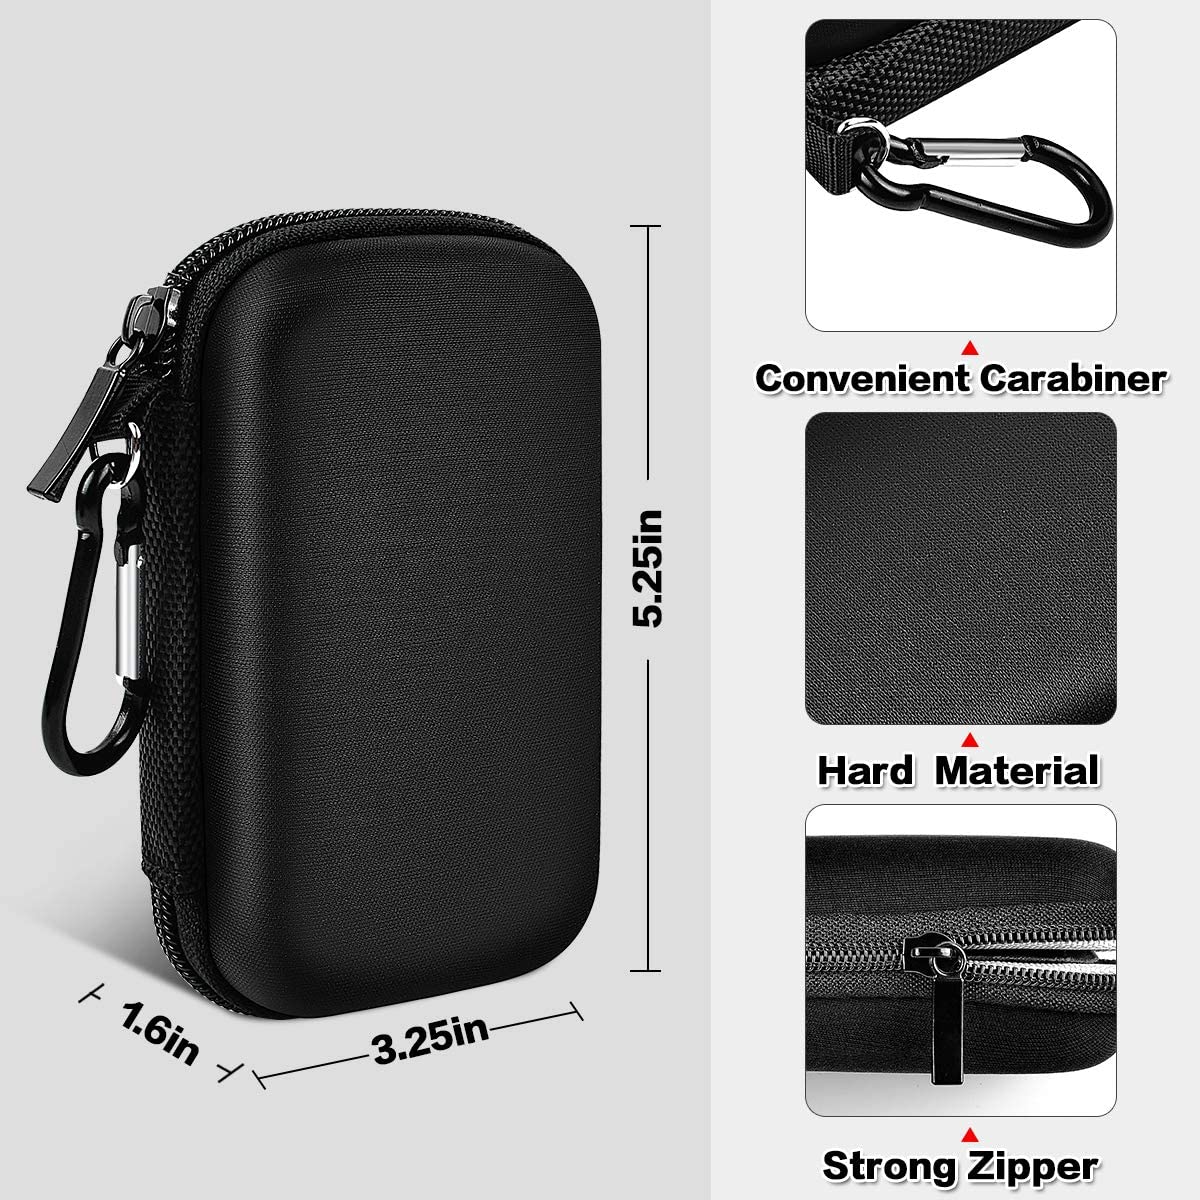 Case Compatible for WD 1TB 2TB 500GB My Passport SSD External Portable Drive-WDBAGF0010BRD-WESN, Carrying Storage Holder Bag Also fits for USB Cables( Case Only)